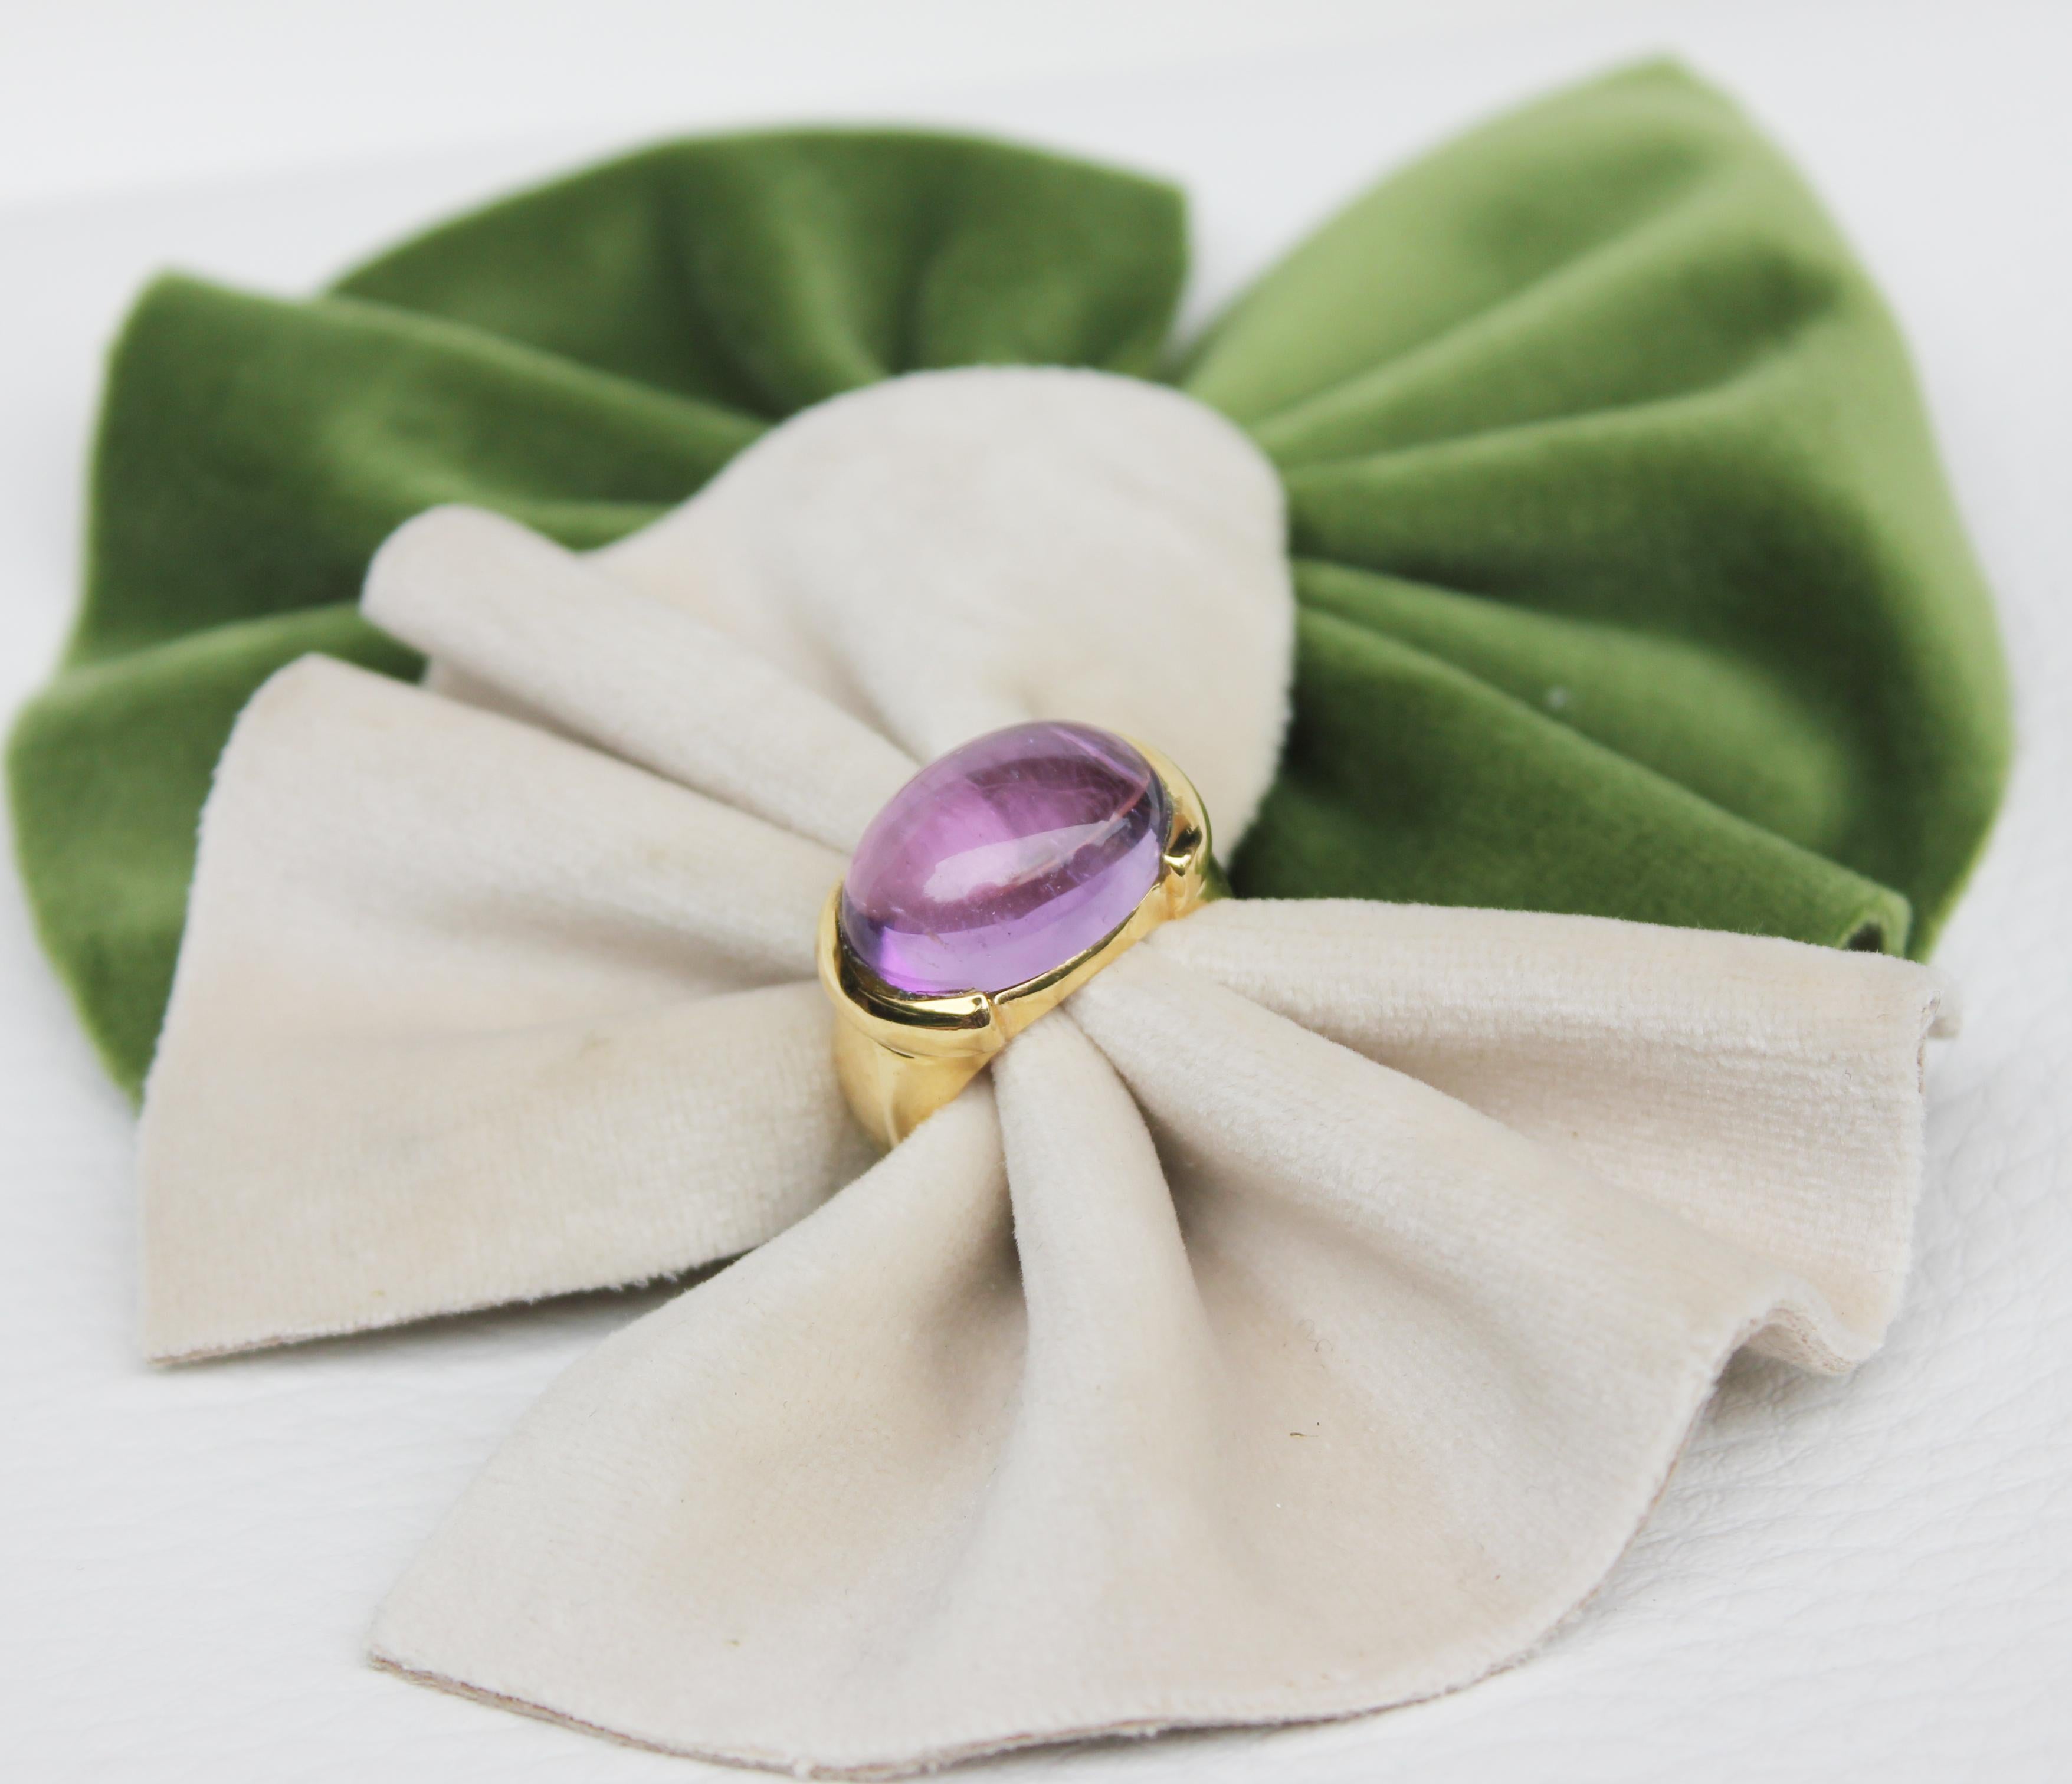 Cocktail ring in yellow gold with amazing Amethyst stone (oval cabochon cut, size: 12x16 mm). The designer Gisella has a refined taste, her jewels stand out from others.
Designed and handmade in Italy by Stanoppi Jewellery since 1948.

All Stanoppi